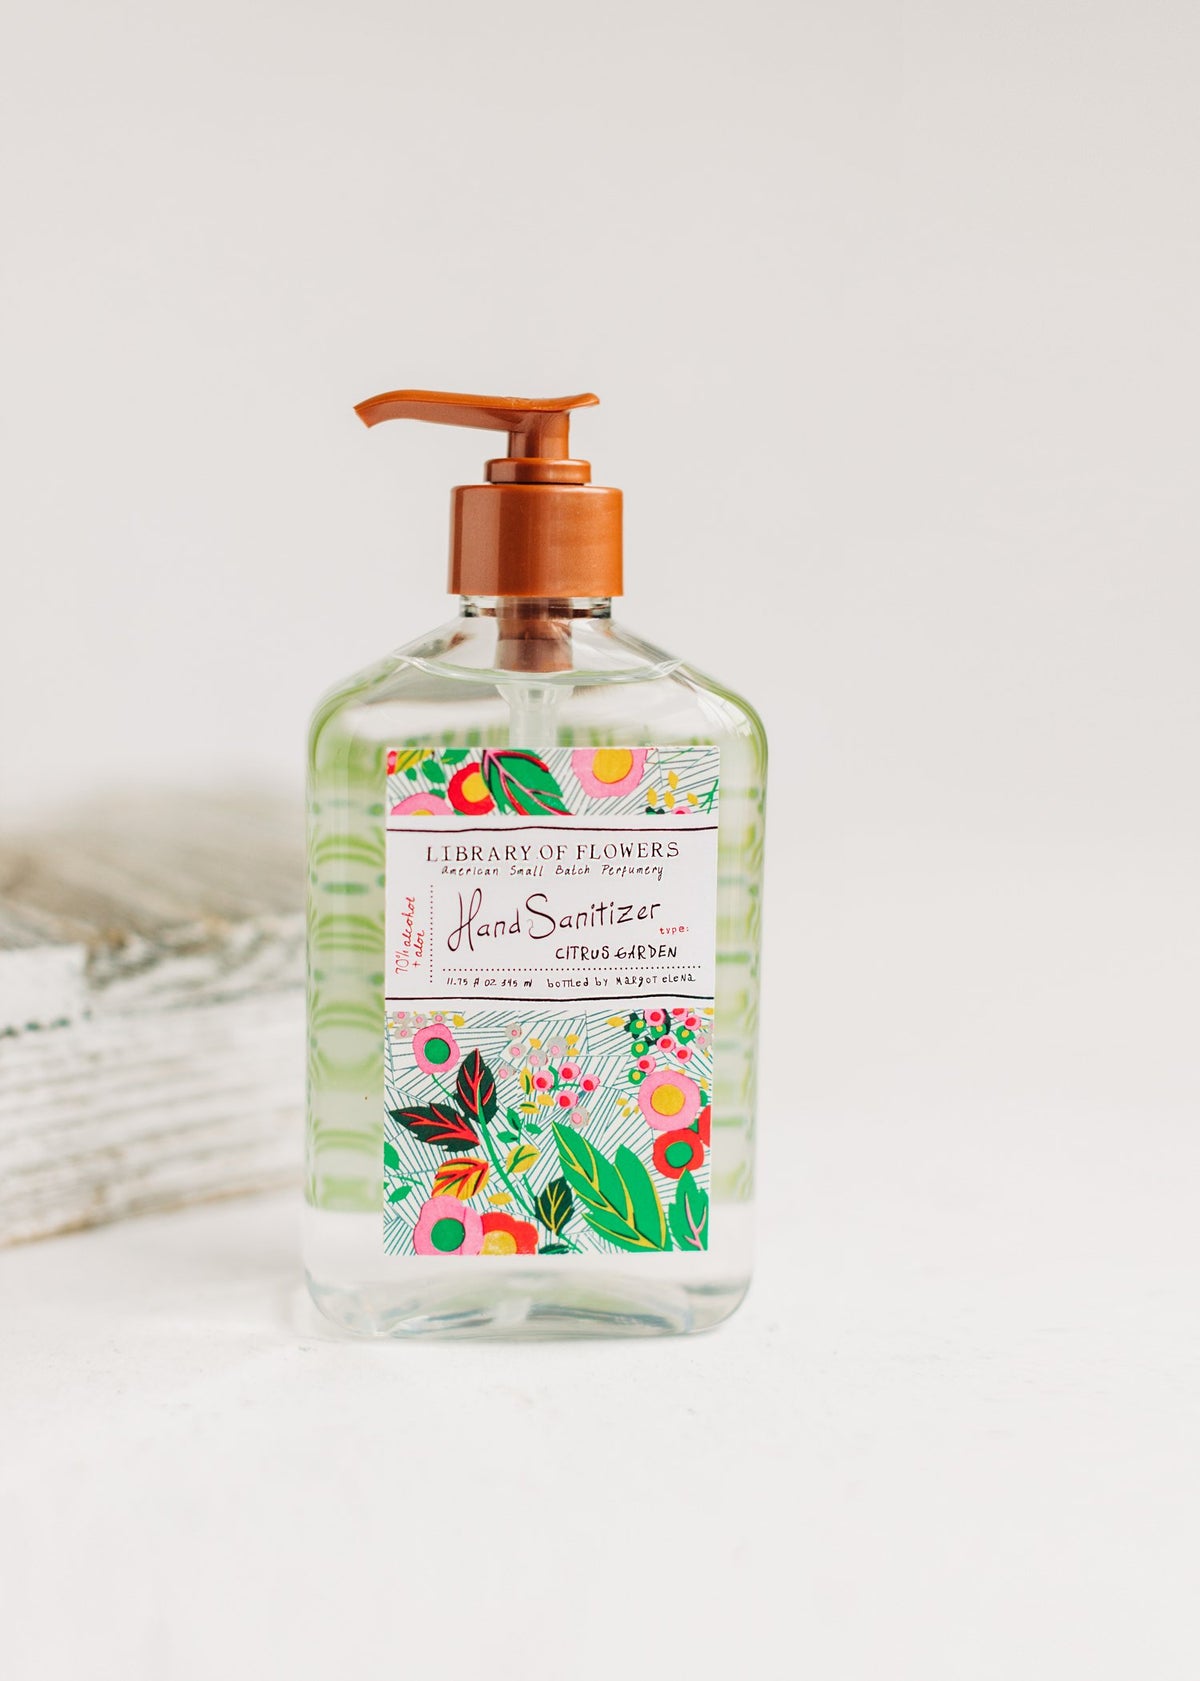 A clear bottle of Margot Elena's Library of Flowers Citrus Garden Hand Sanitizer Gel with a floral and fruit design, labeled "citrus garden," placed on a white surface against a white background.